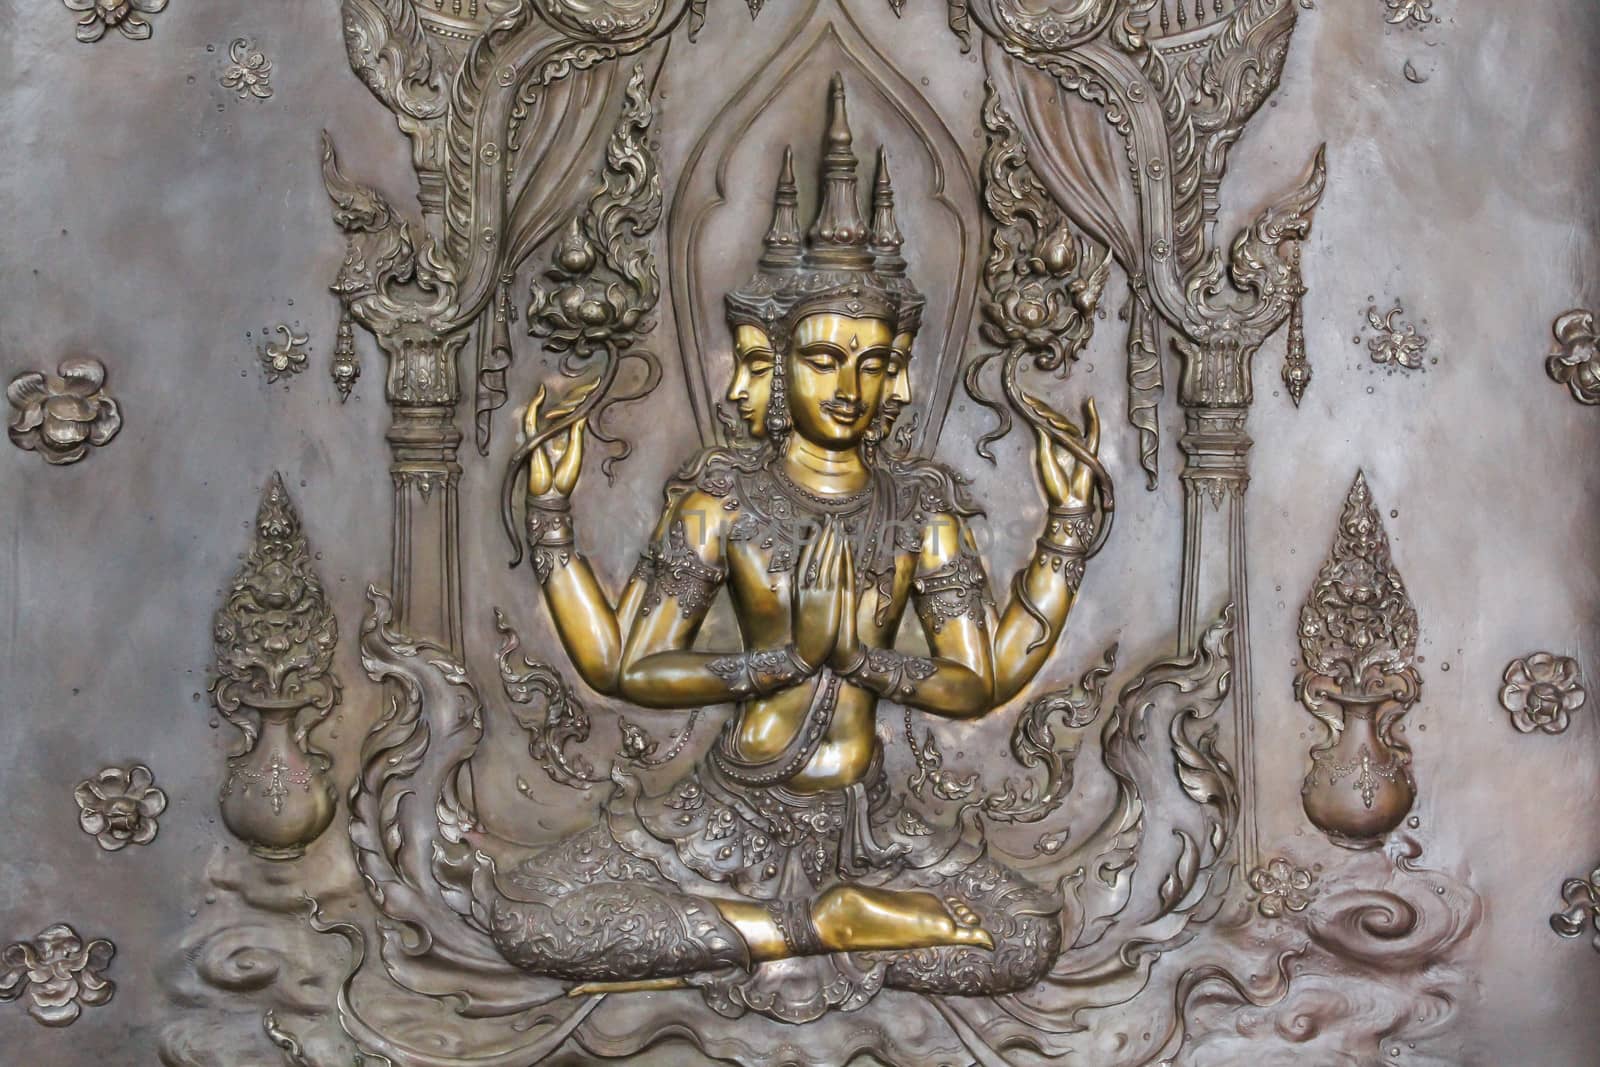 art on metal plate about buddha history at temple in Udonthanee  province, Thailand